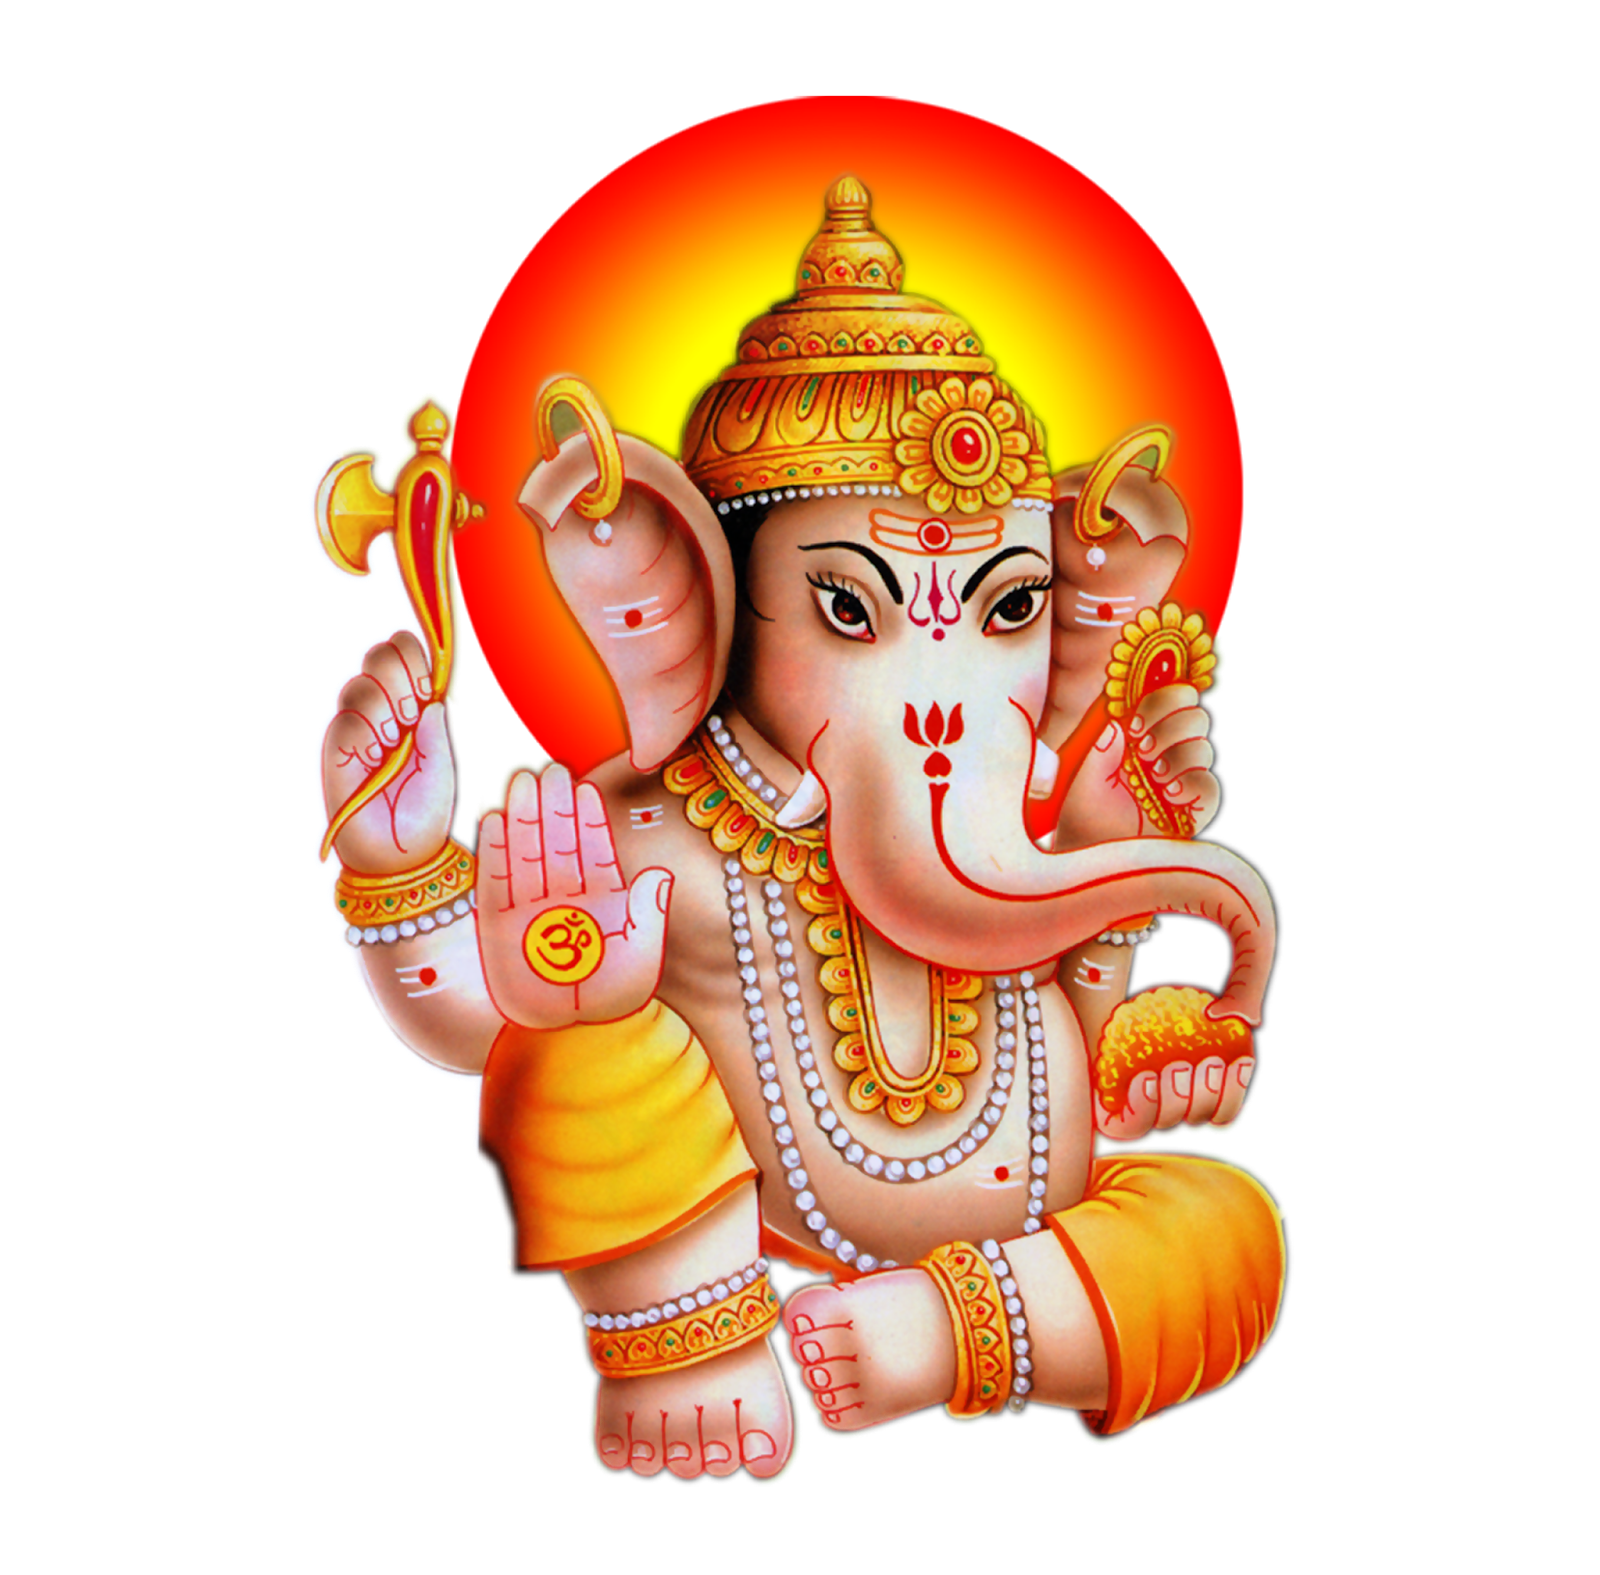 Ganesh Chaturthi Poster with 